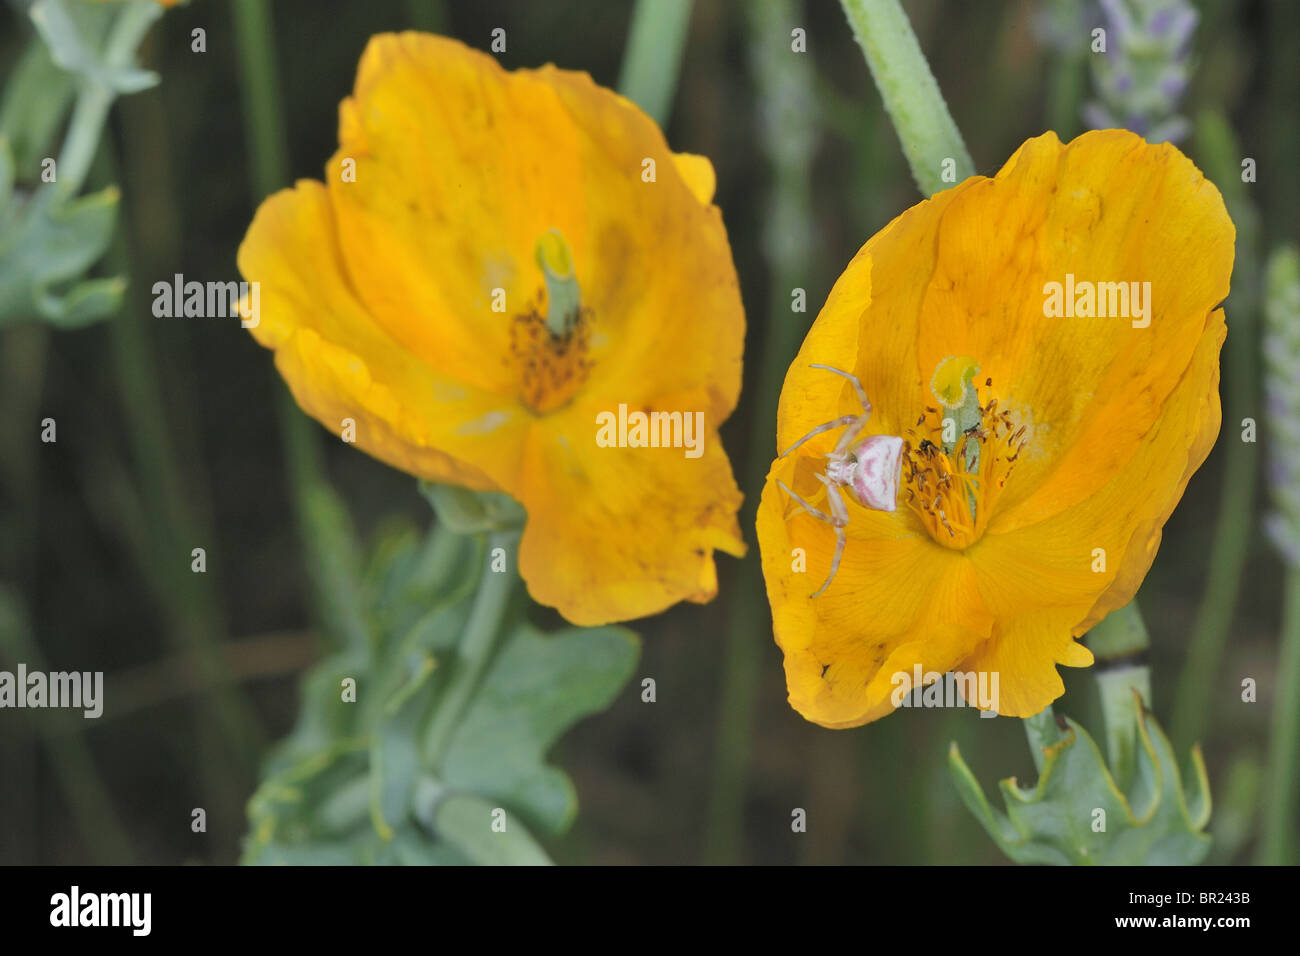 Flower crab spider (Thomisus onustus) lying in wait for prey on a yellow hornpoppy's flower in summer Stock Photo